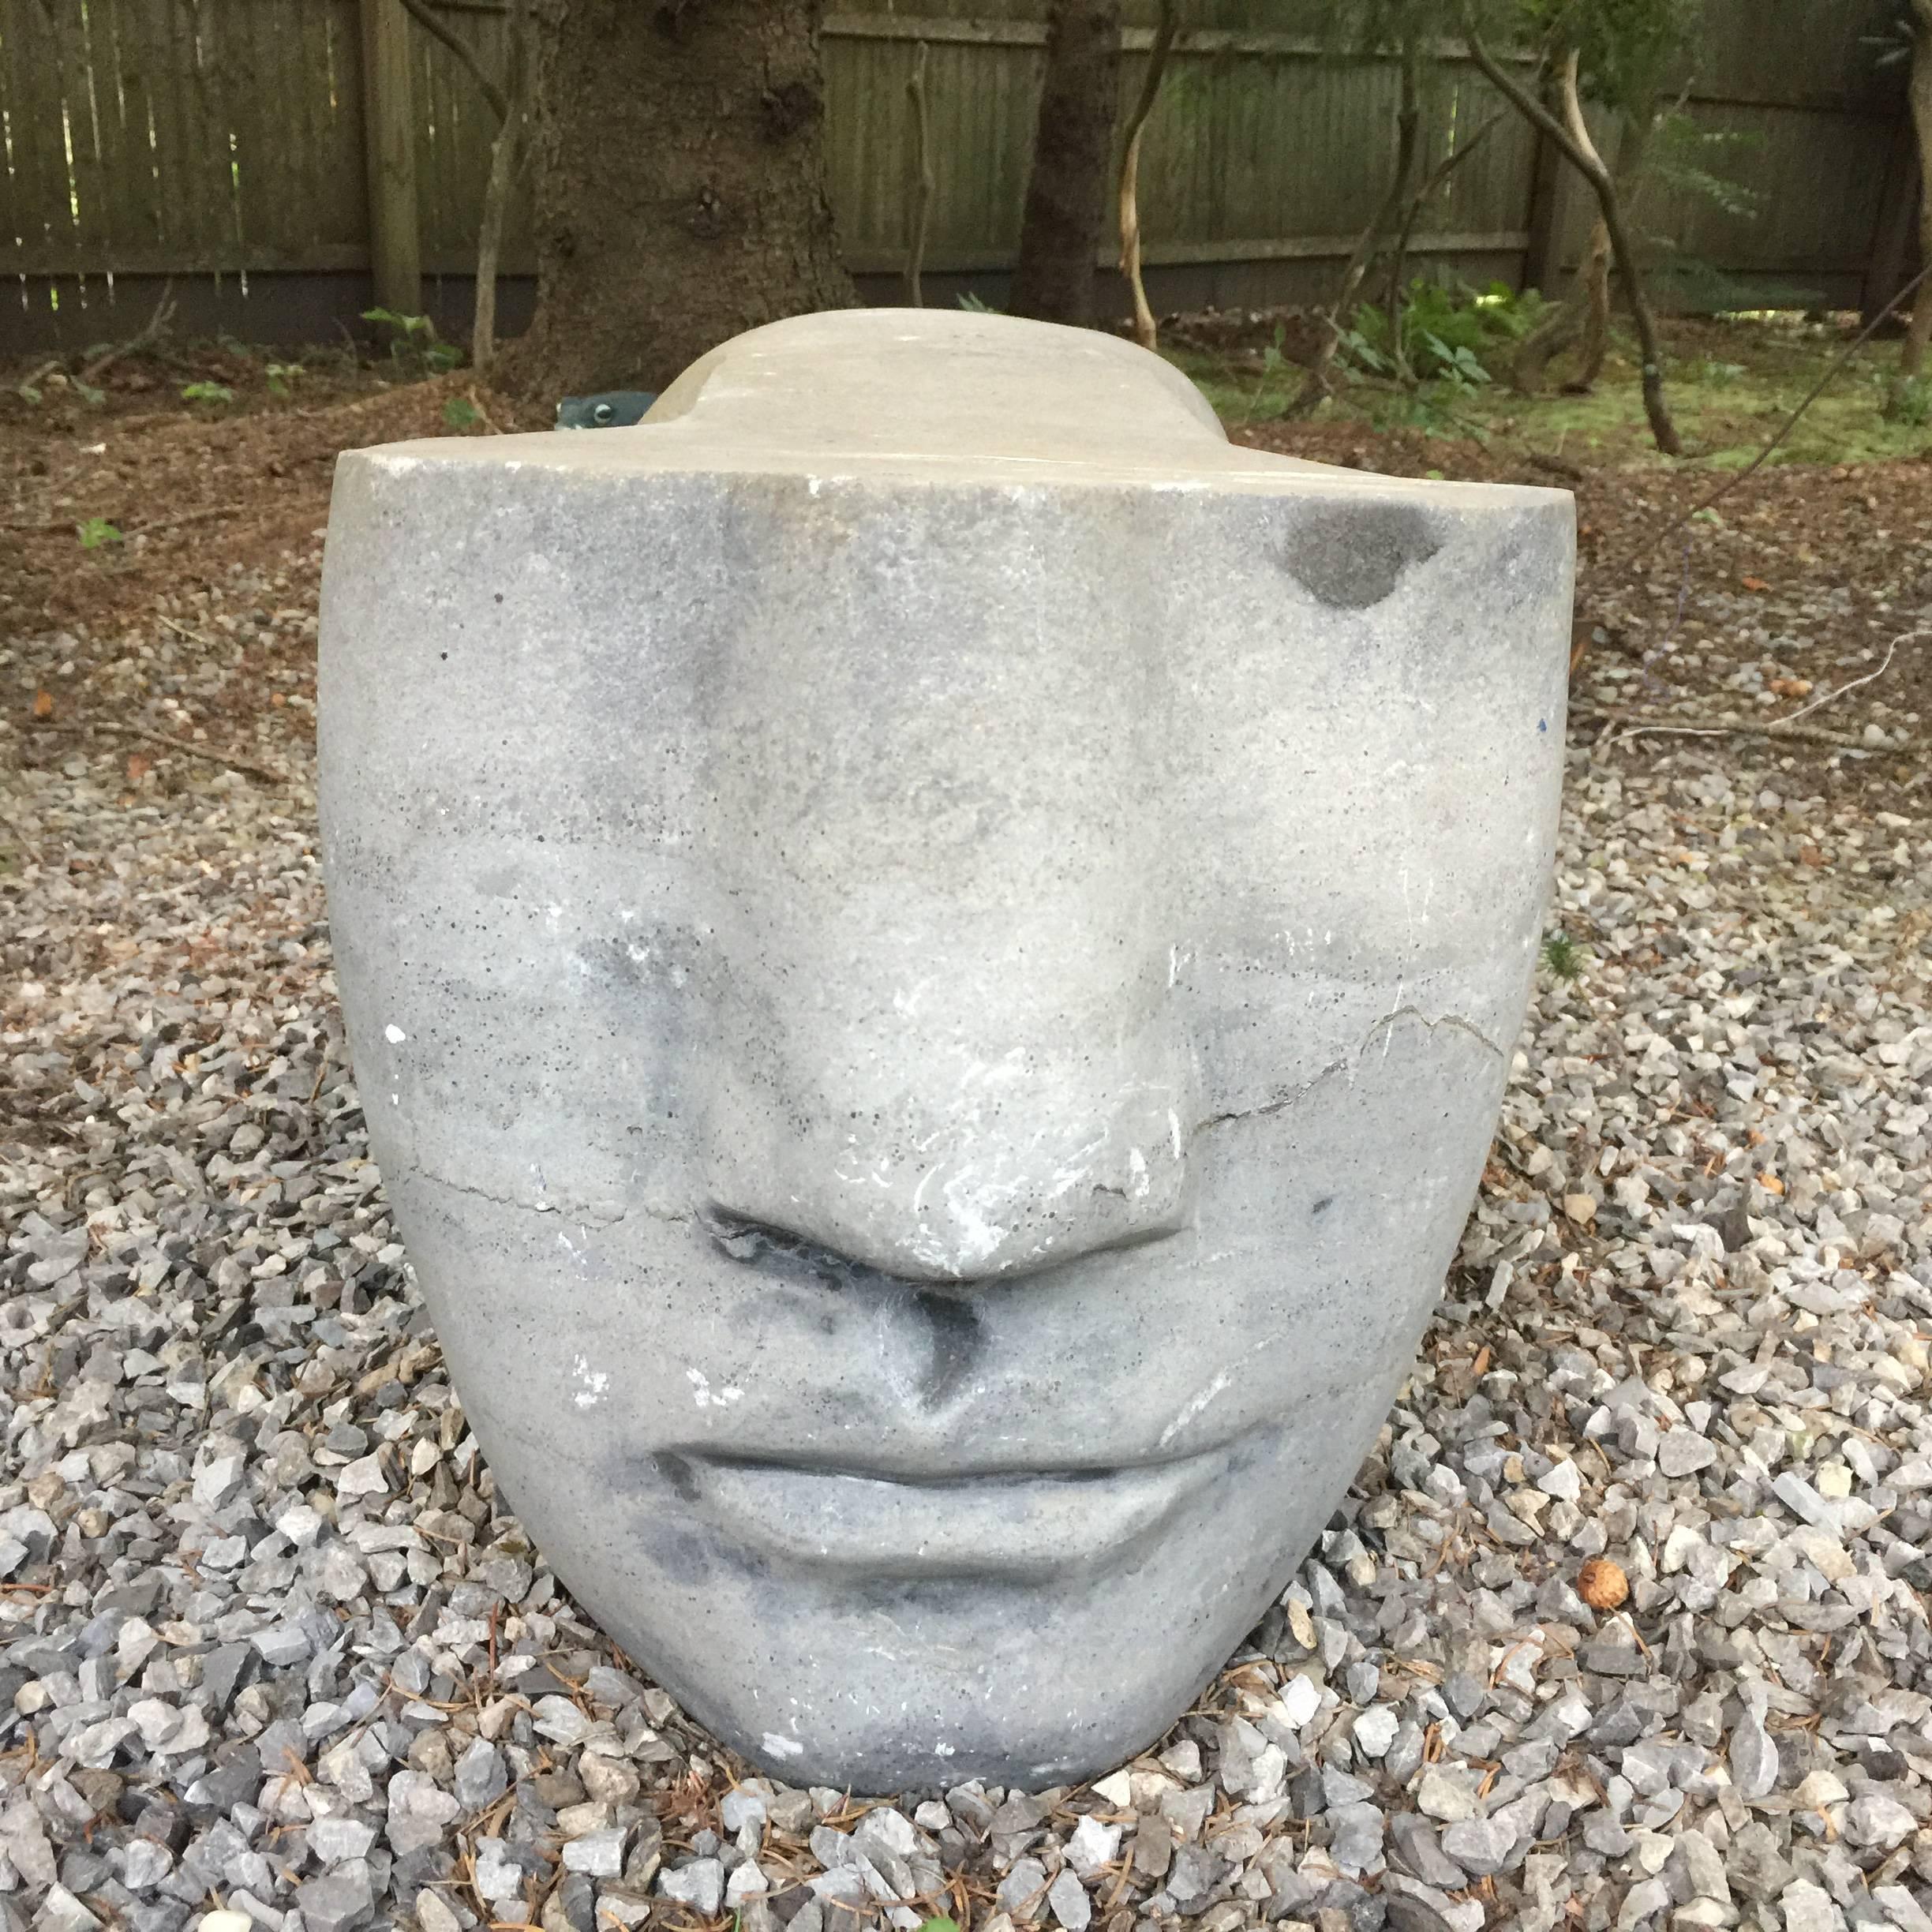 This exquisite stylized Egyptian sphinx is carved of honed grey stone. Sourced from an important Hamptons estate, this sculpture can be used indoors as well as outdoors.